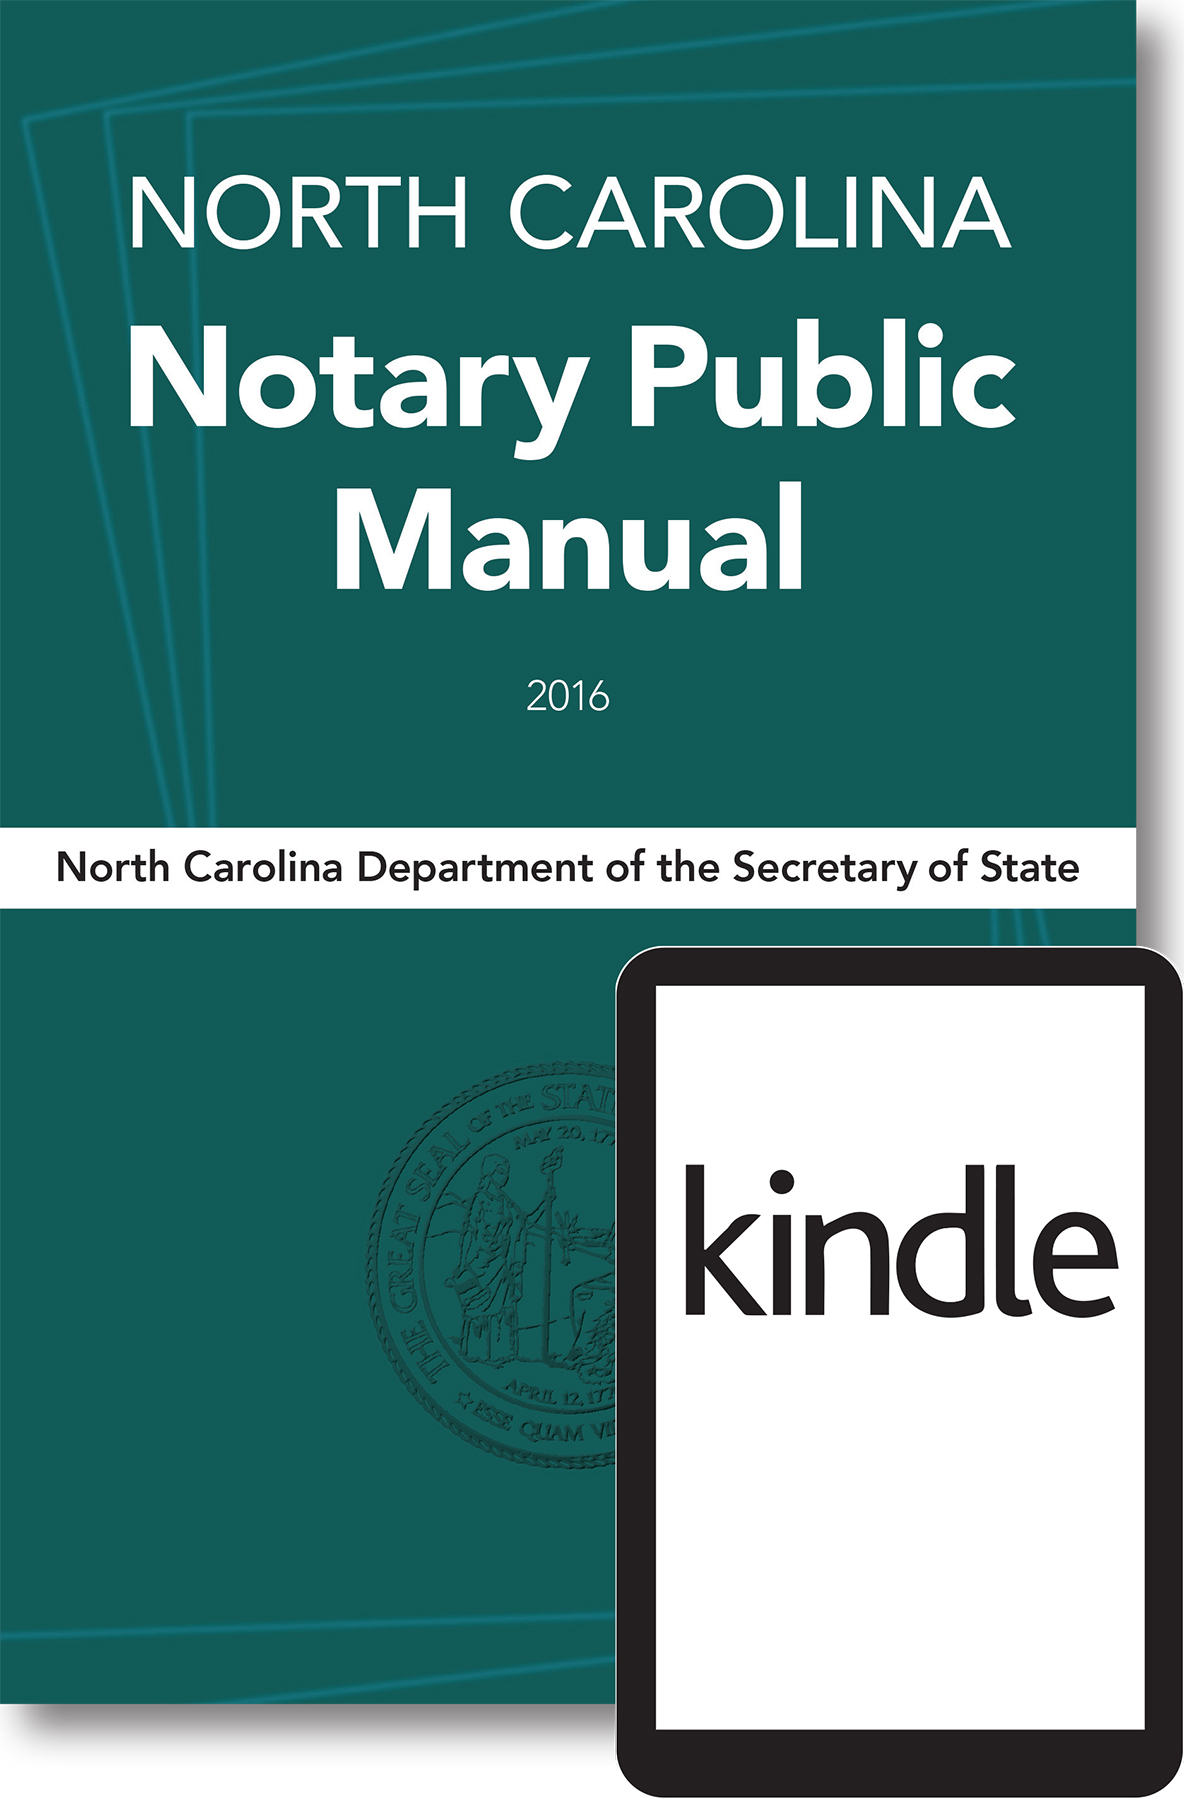 Cover image for EPUB Download Item: North Carolina Notary Public Manual, 2016 (Mobi file format for Kindle e-Reading devices)